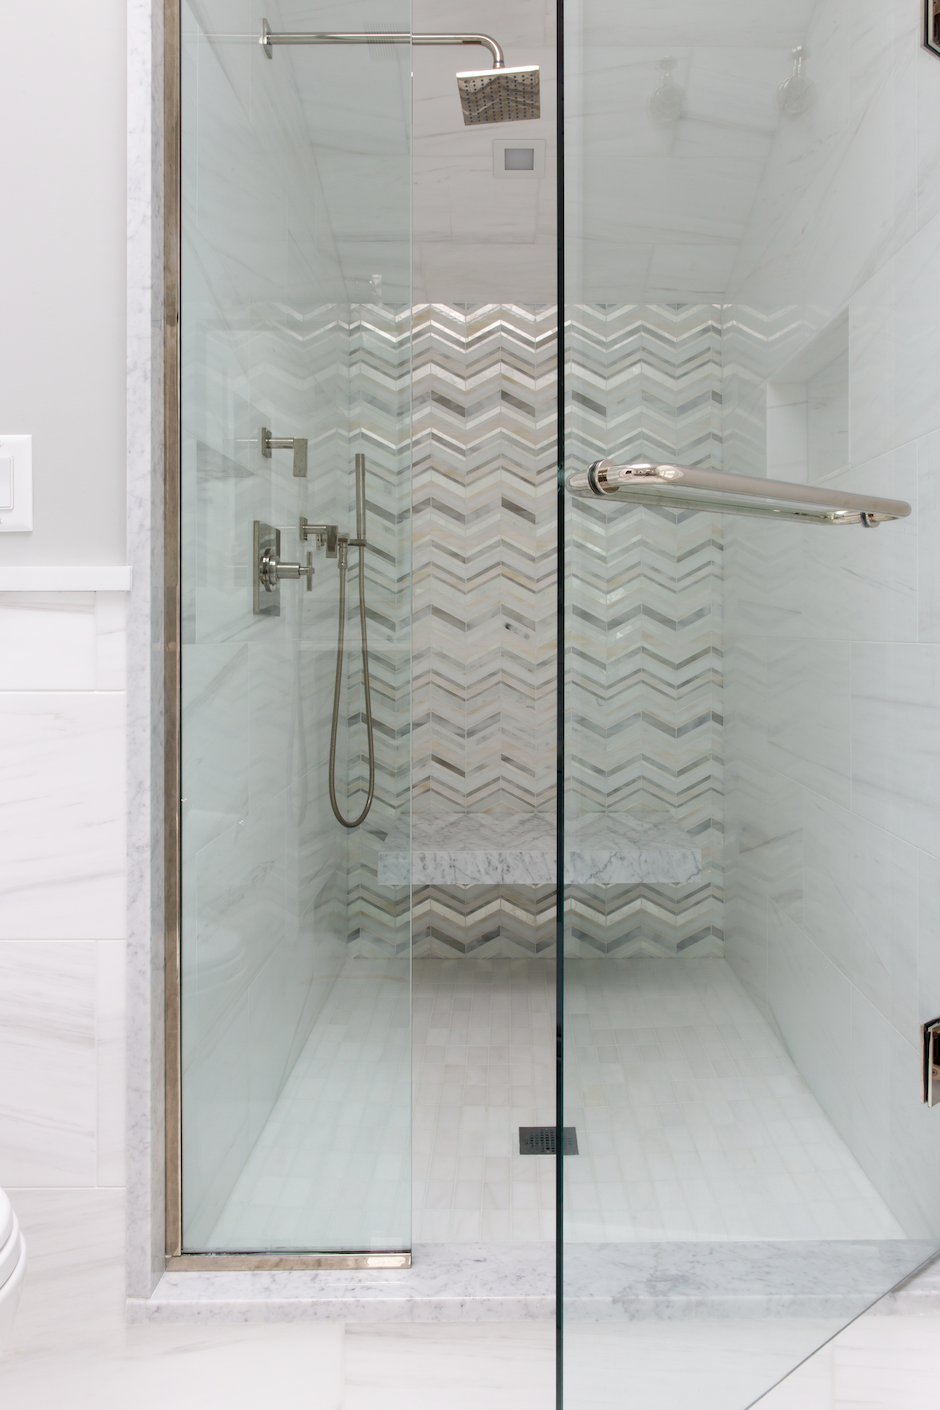 https://hips.hearstapps.com/hmg-prod/images/walk-in-shower-ideas-metallic-chevron-feature-wall-643ac75517733.png?crop=0.9863588667366212xw:1xh;center,top&resize=980:*